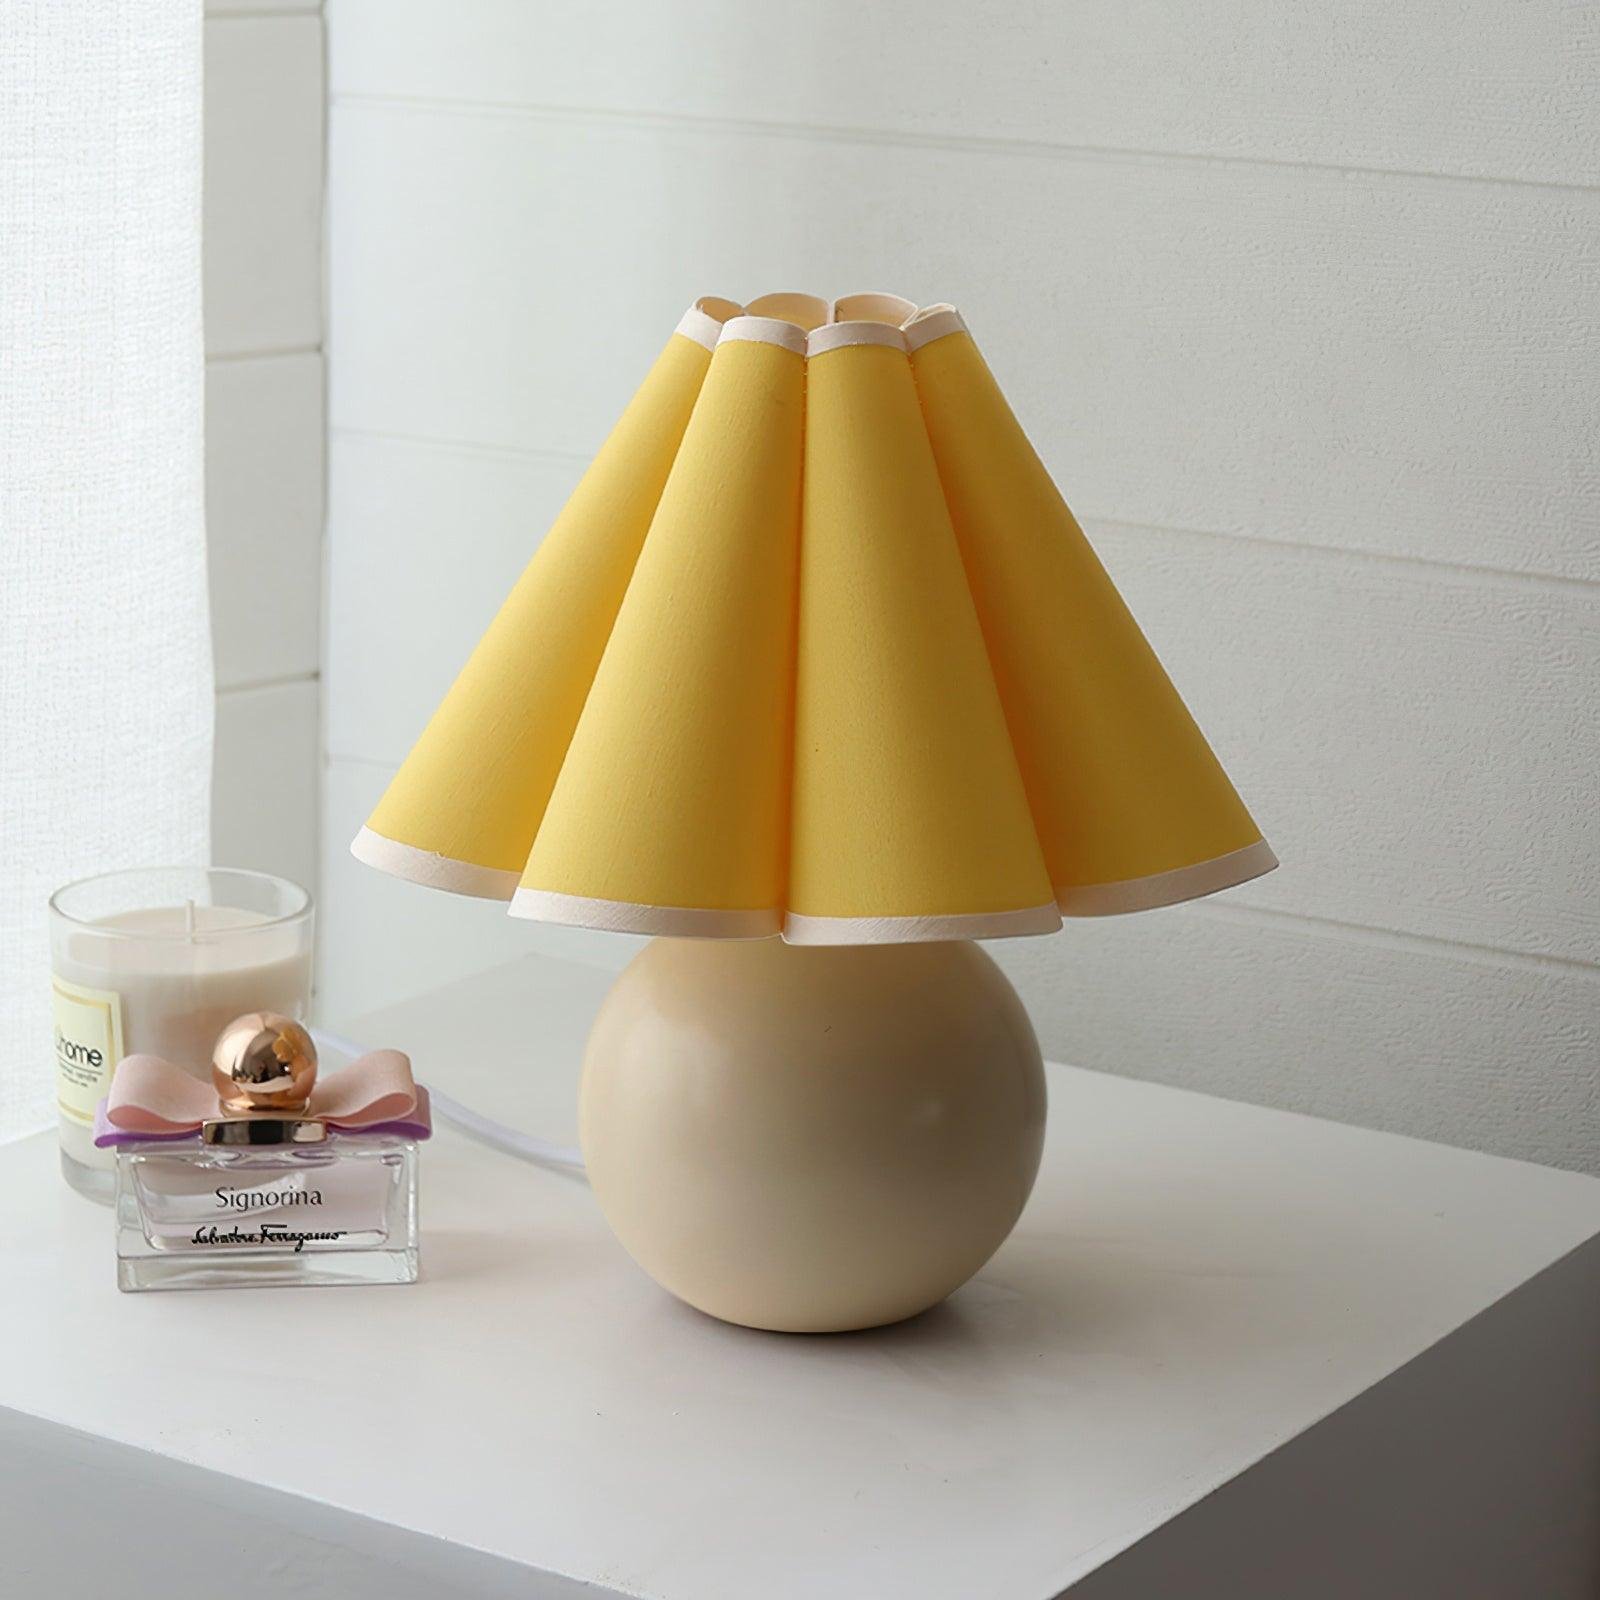 Yellow Table Lamp featuring Small Knife Pleats, measuring 11" in diameter and 9.8" in height (28cm x 25cm), designed with a UK Plug.